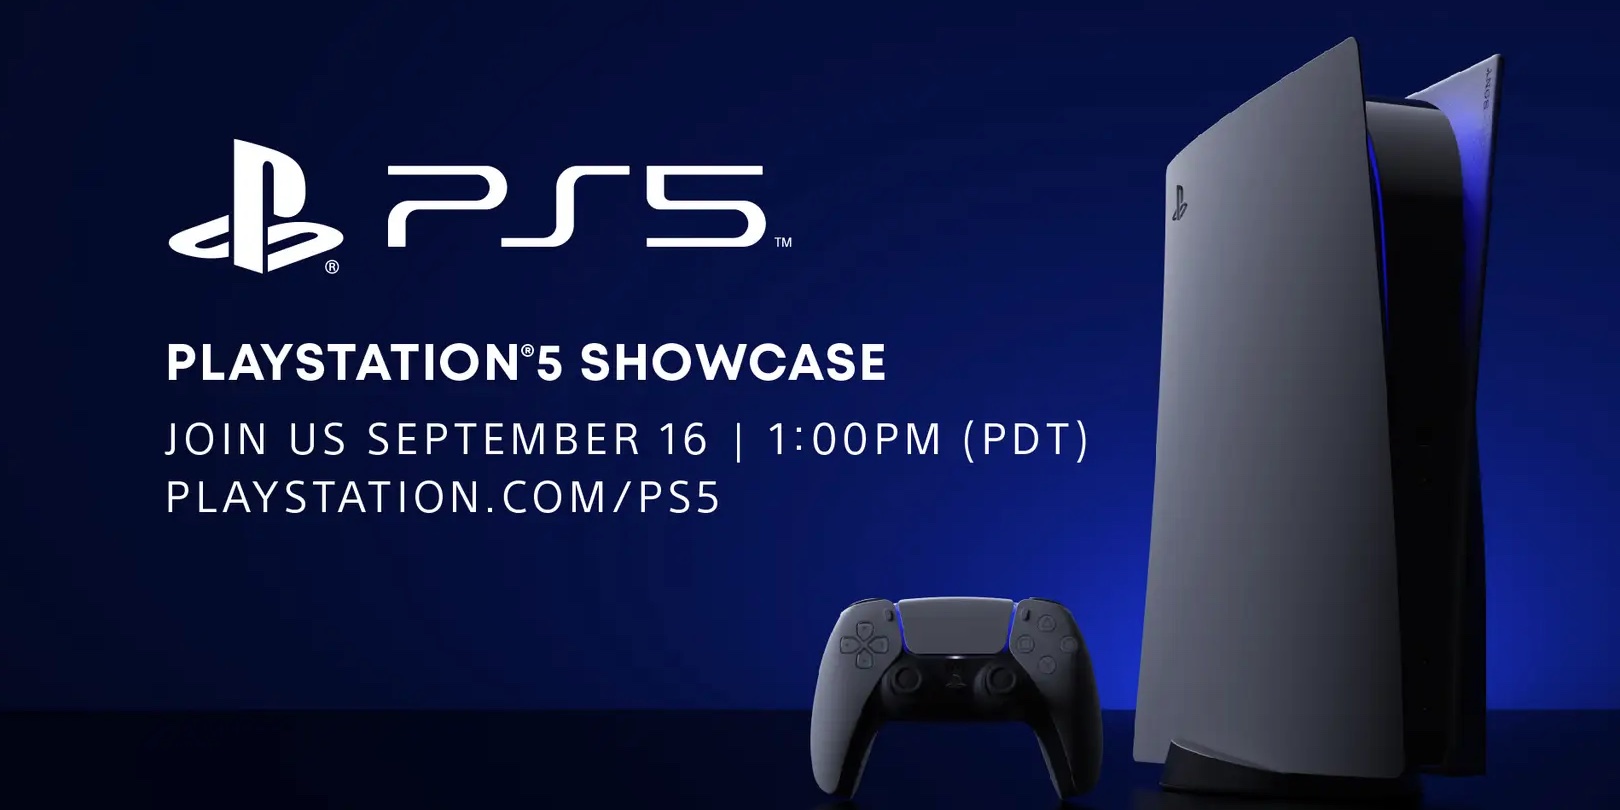 PlayStation 5 release date, price, and more in today's showcase 